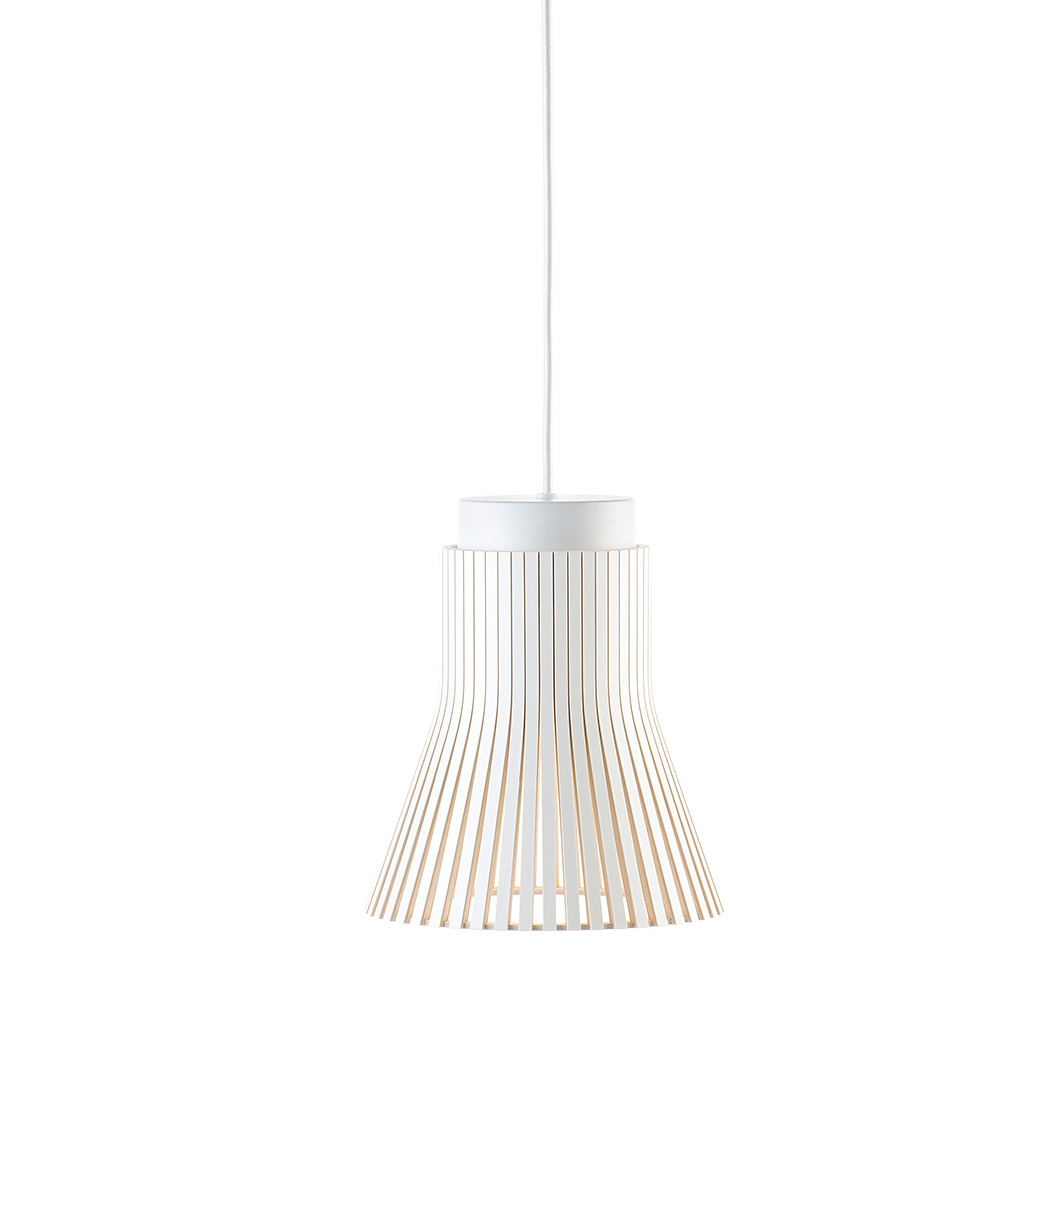 Petite 4600 pendant lamp is available in white laminated